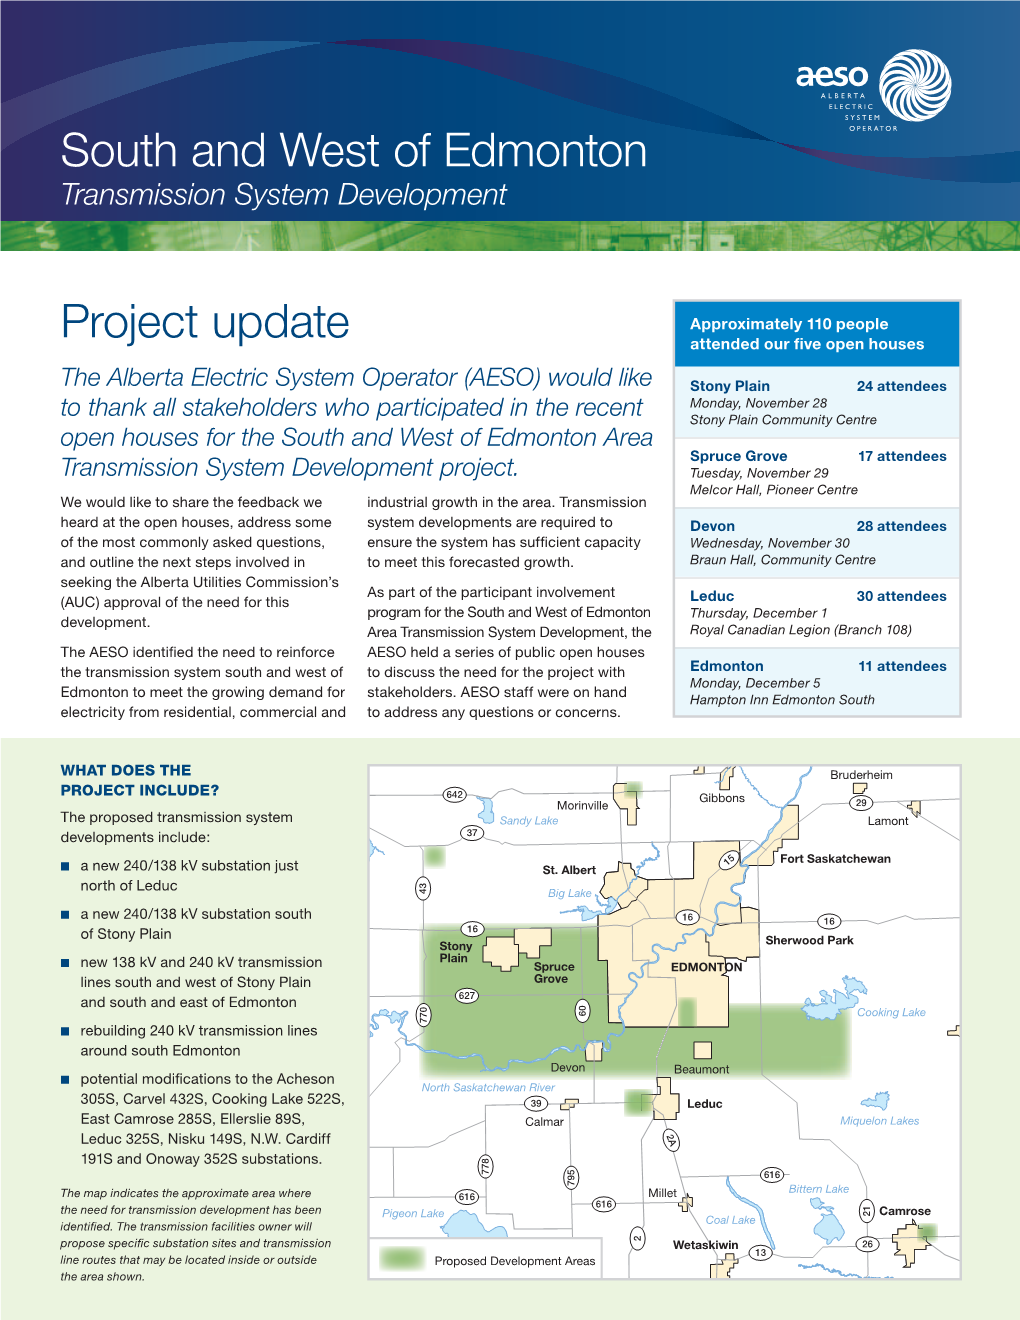 South and West of Edmonton Newsletter